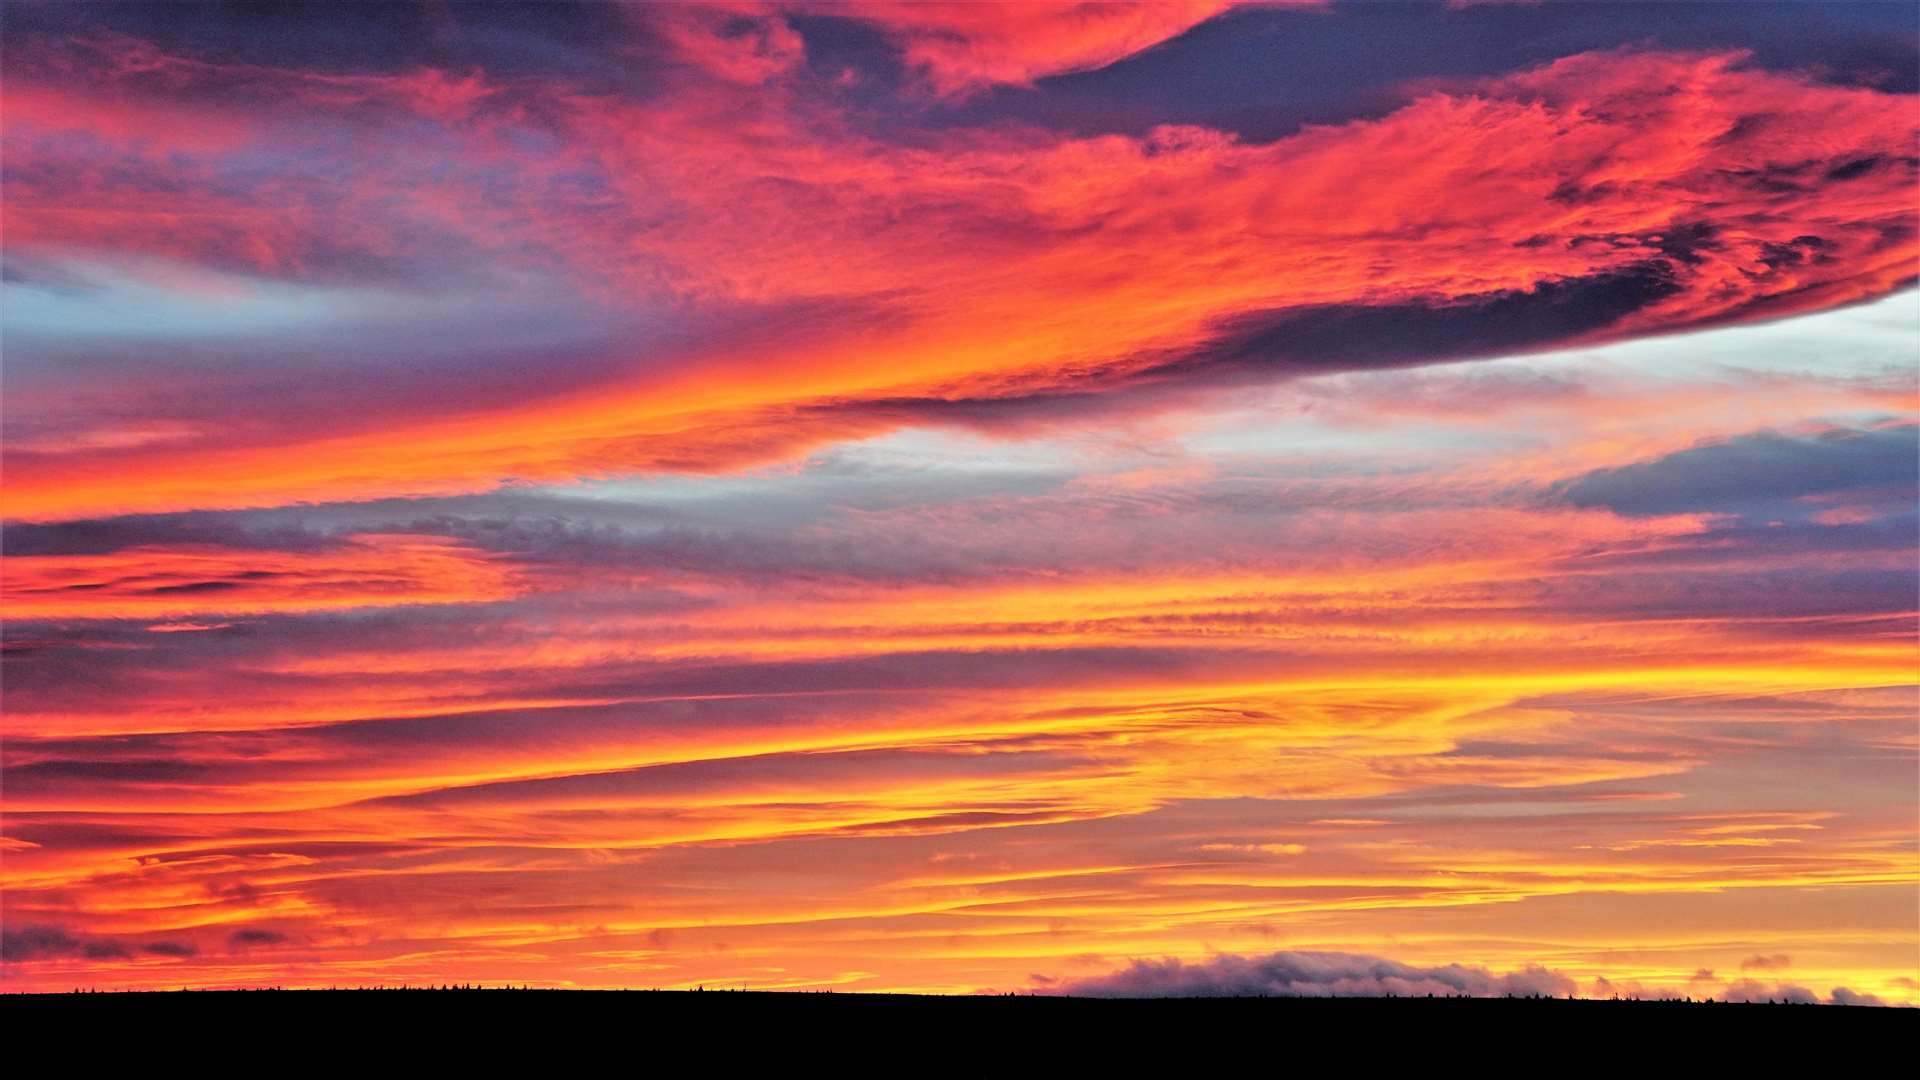 The sky over Caithness appeared slashed with an array of fiery colour shades just before the sun finally disappeared over the horizon. Picture: DGS